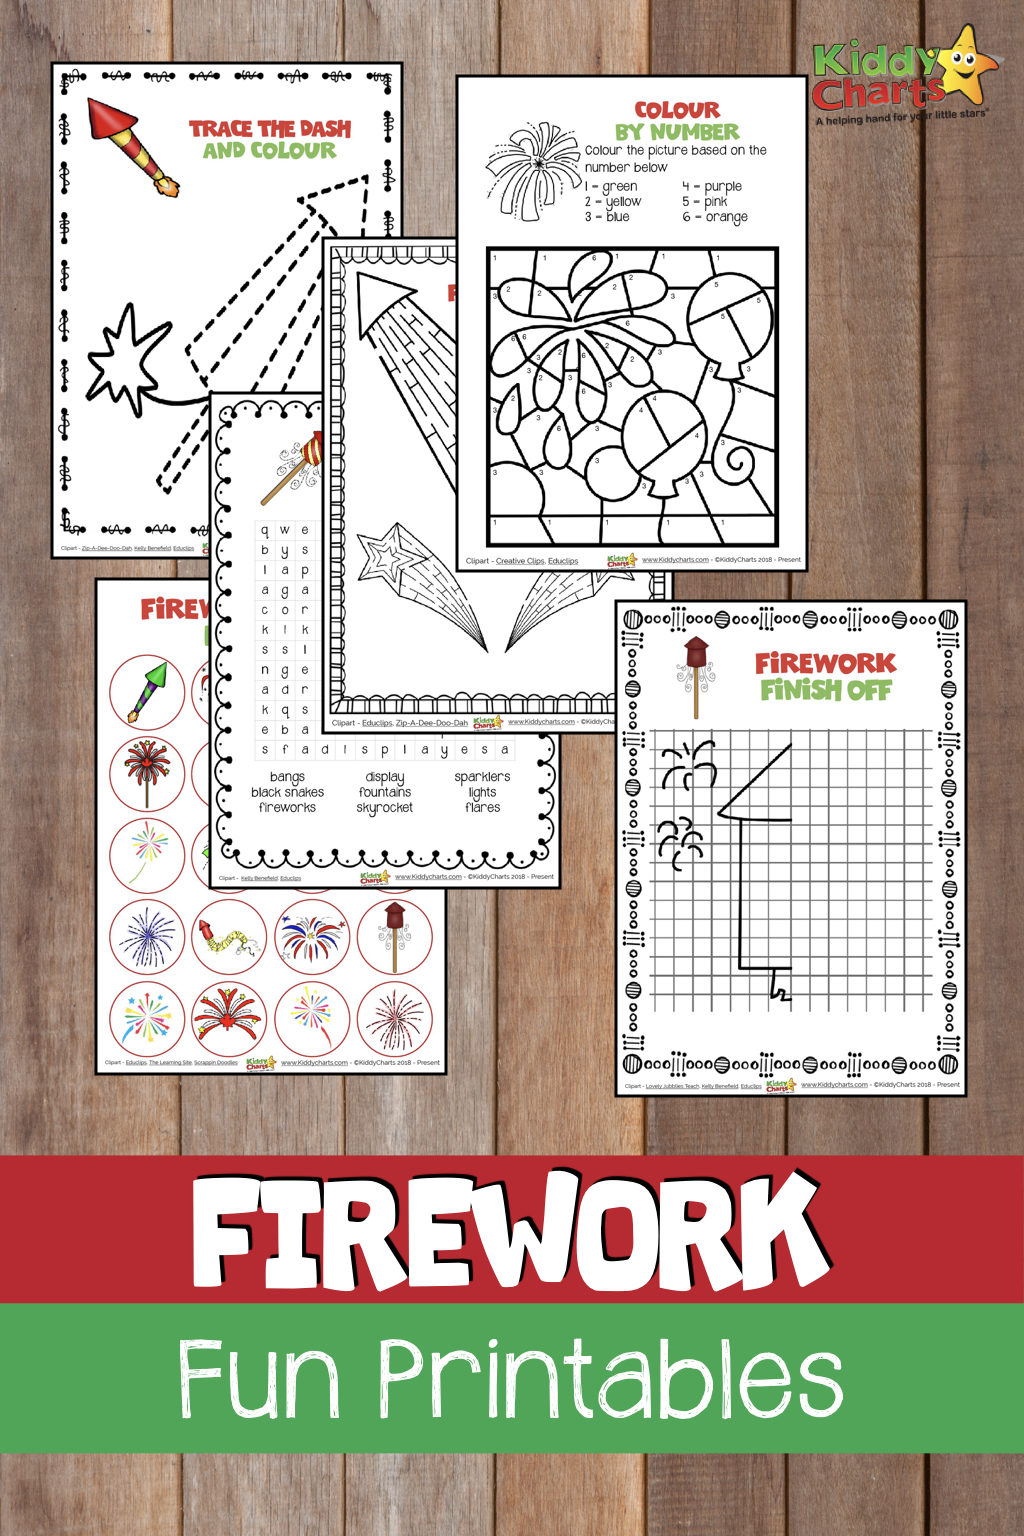 We have a gorgeous mini eBook of firework activities for you all - take a look, so much for the kids on the Fourth of July and Bonfire Night in particular! #bonfirenight #4thofjuly #independenceday #fireworks #printables